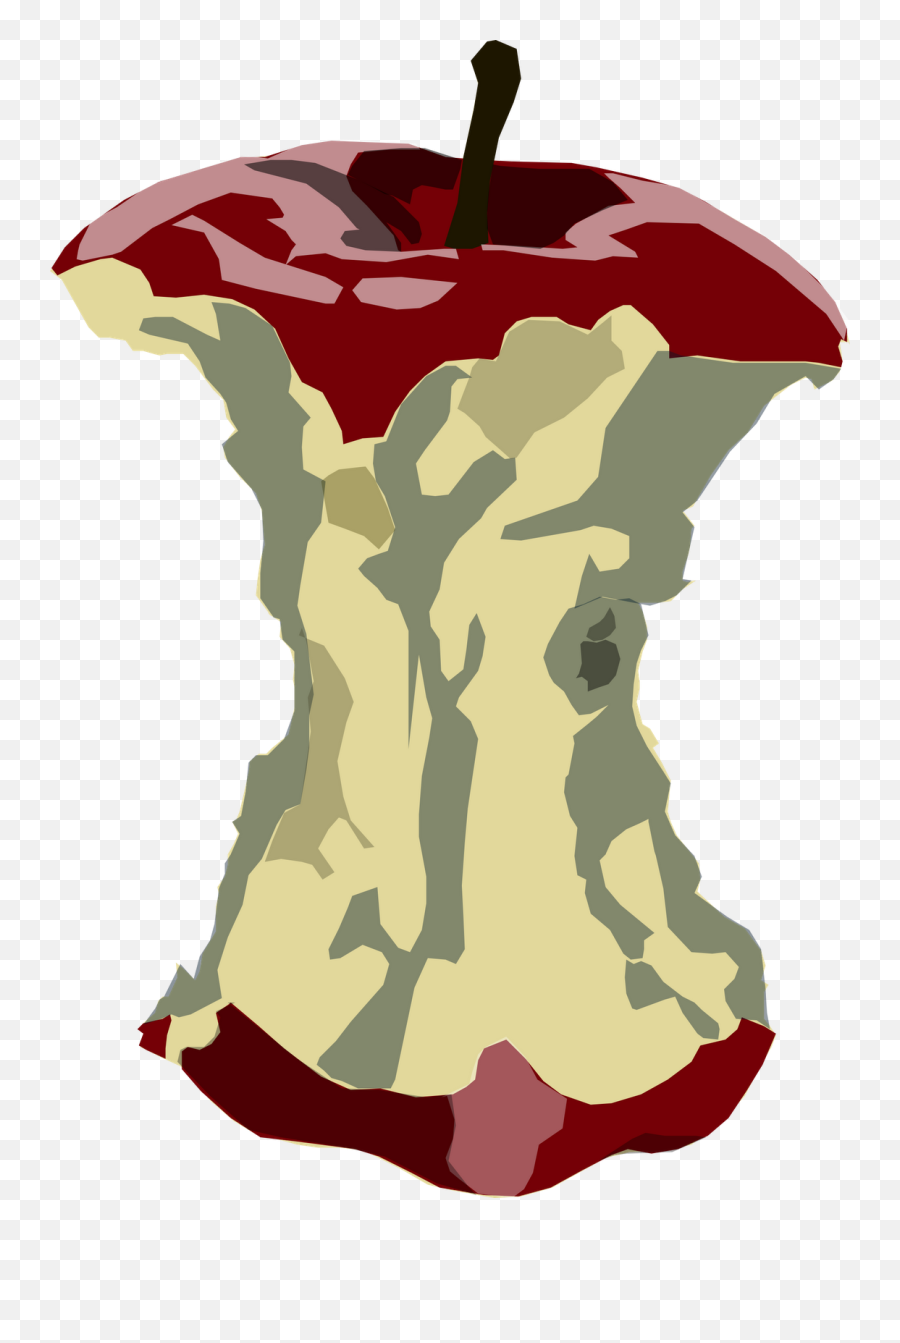 Rotten Meat Png Transparent Meatpng Images Pluspng - Rotten Apple Core Cartoon,Cartoon Food Png